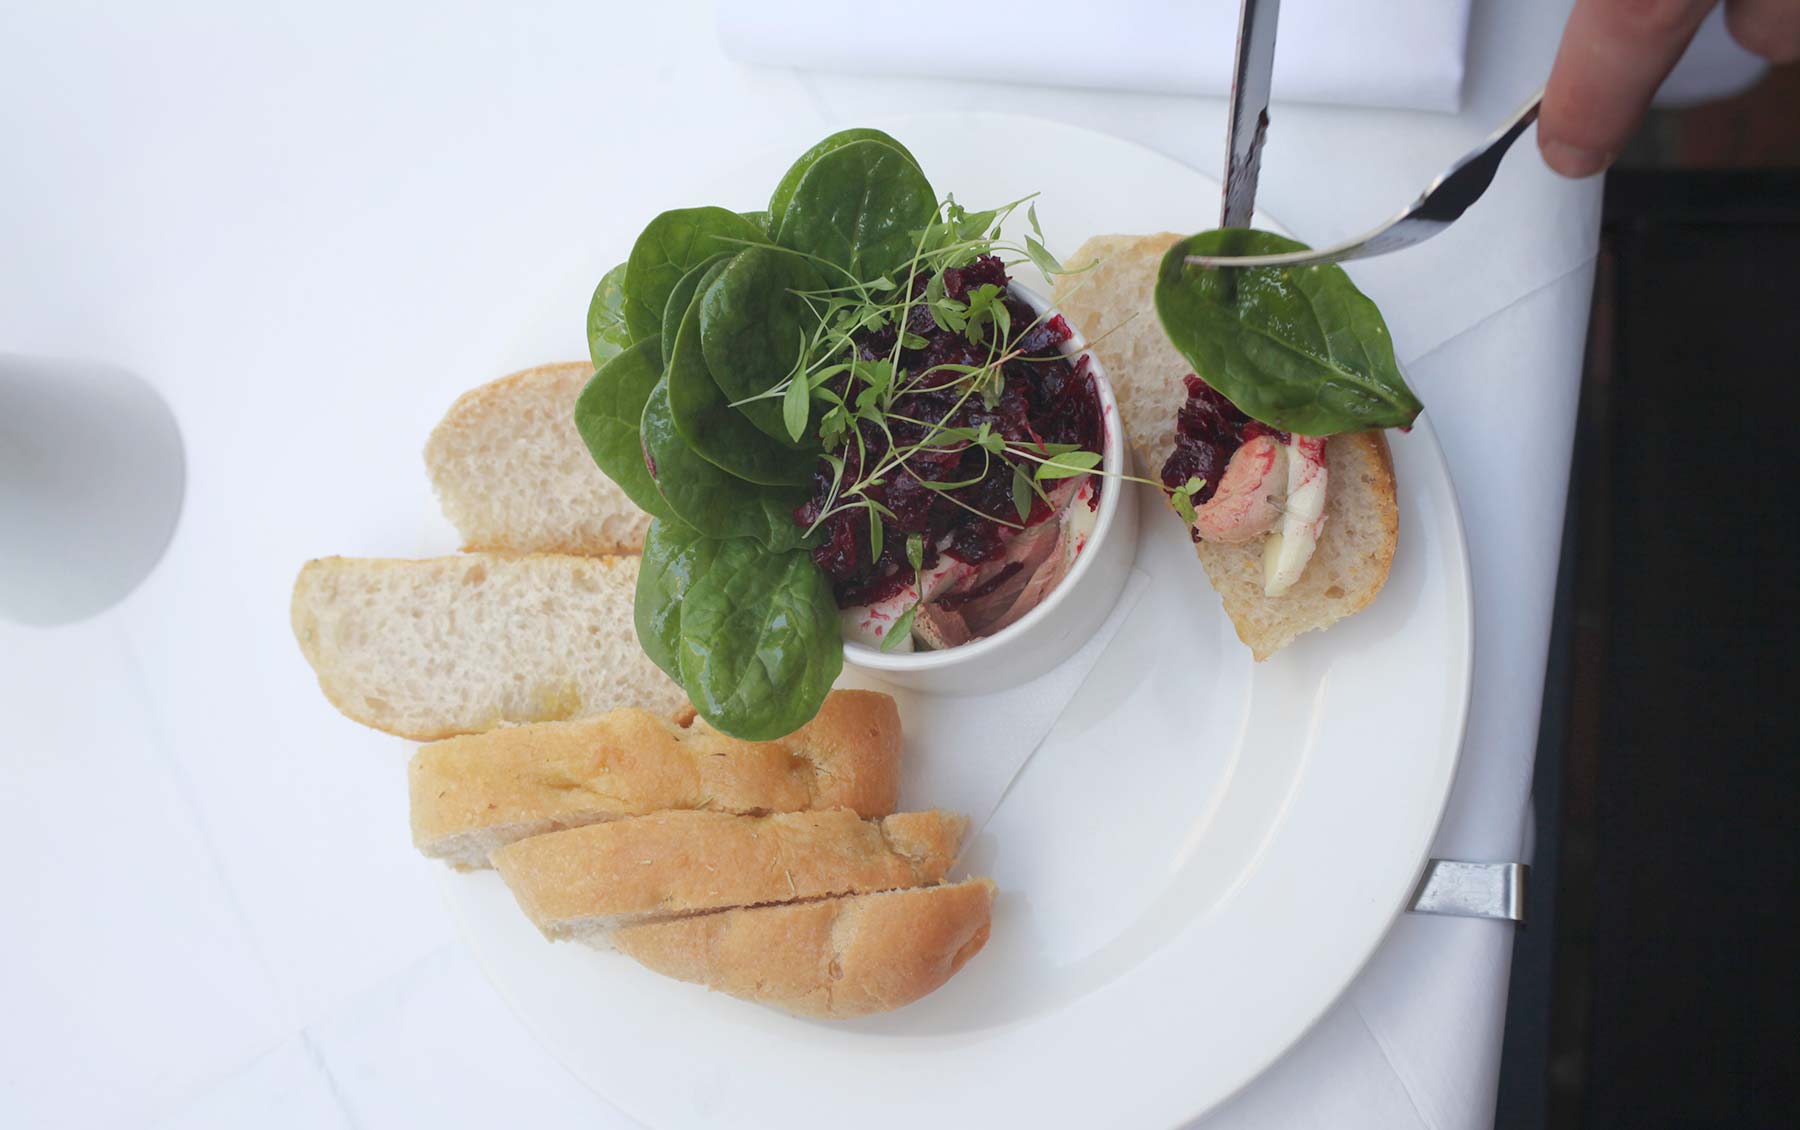 Chicken liver parfait, truffle butter, beetroot chutney, spinach leaves, focaccia.